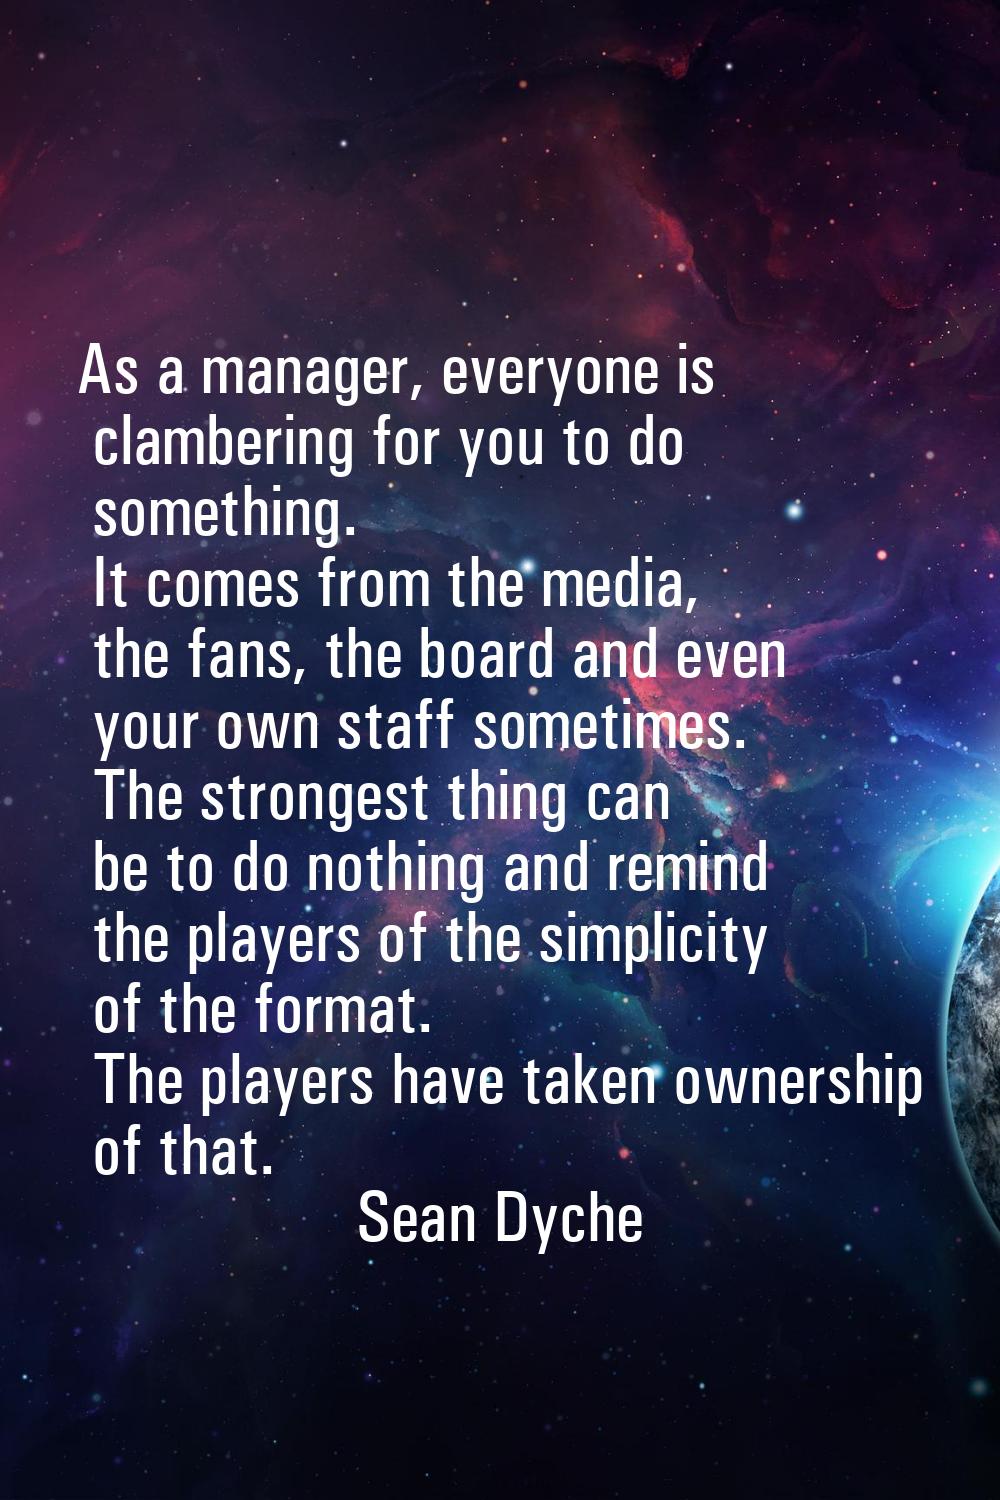 As a manager, everyone is clambering for you to do something. It comes from the media, the fans, th